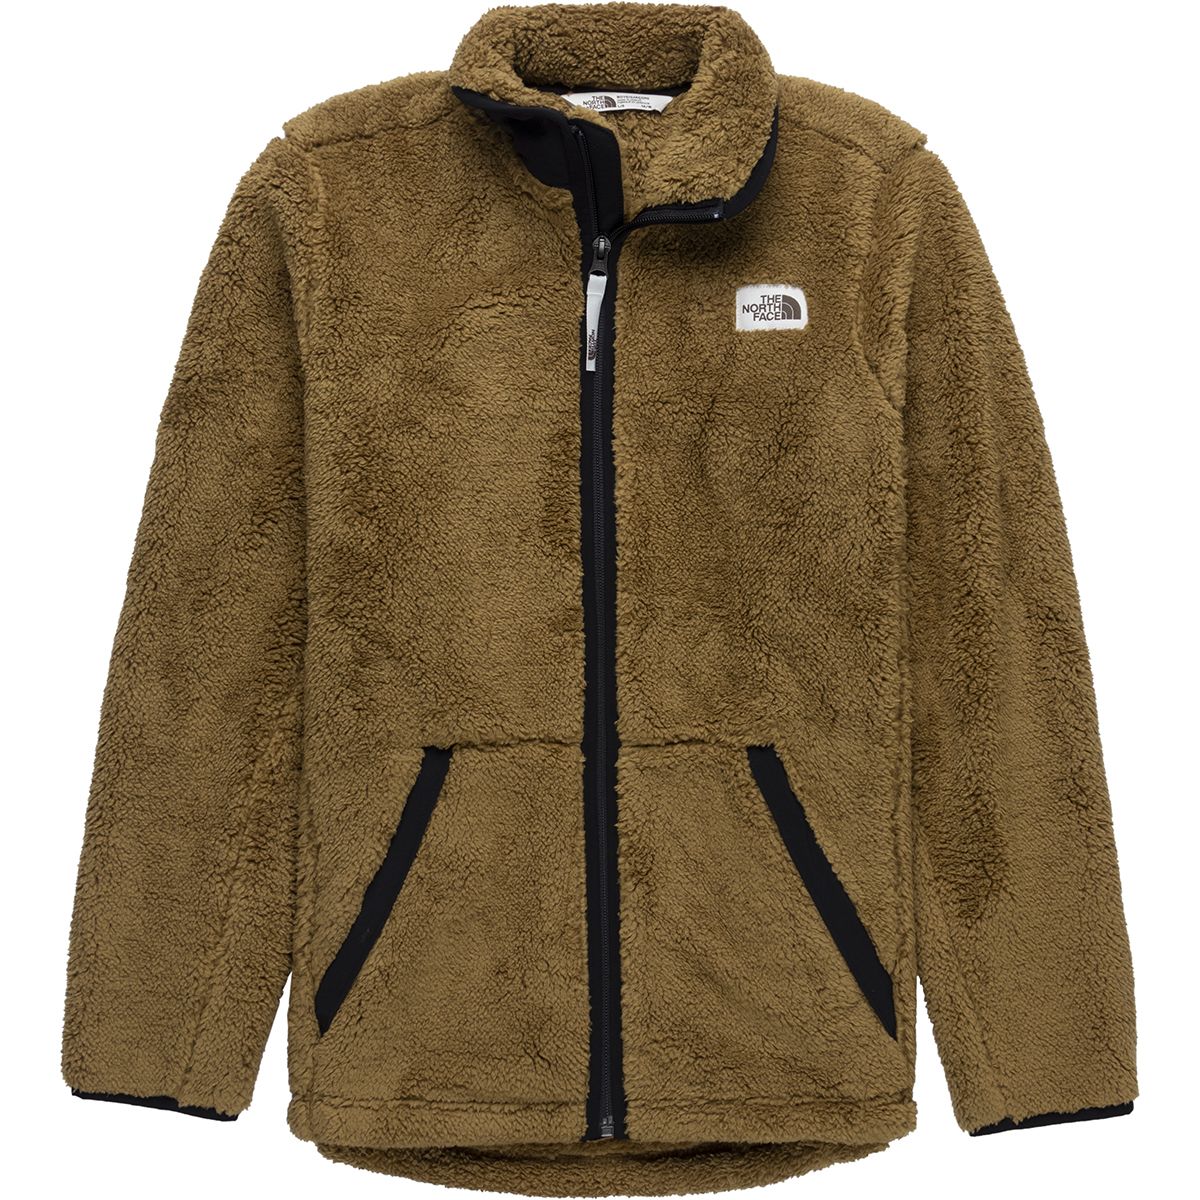 north face campshire full zip women's